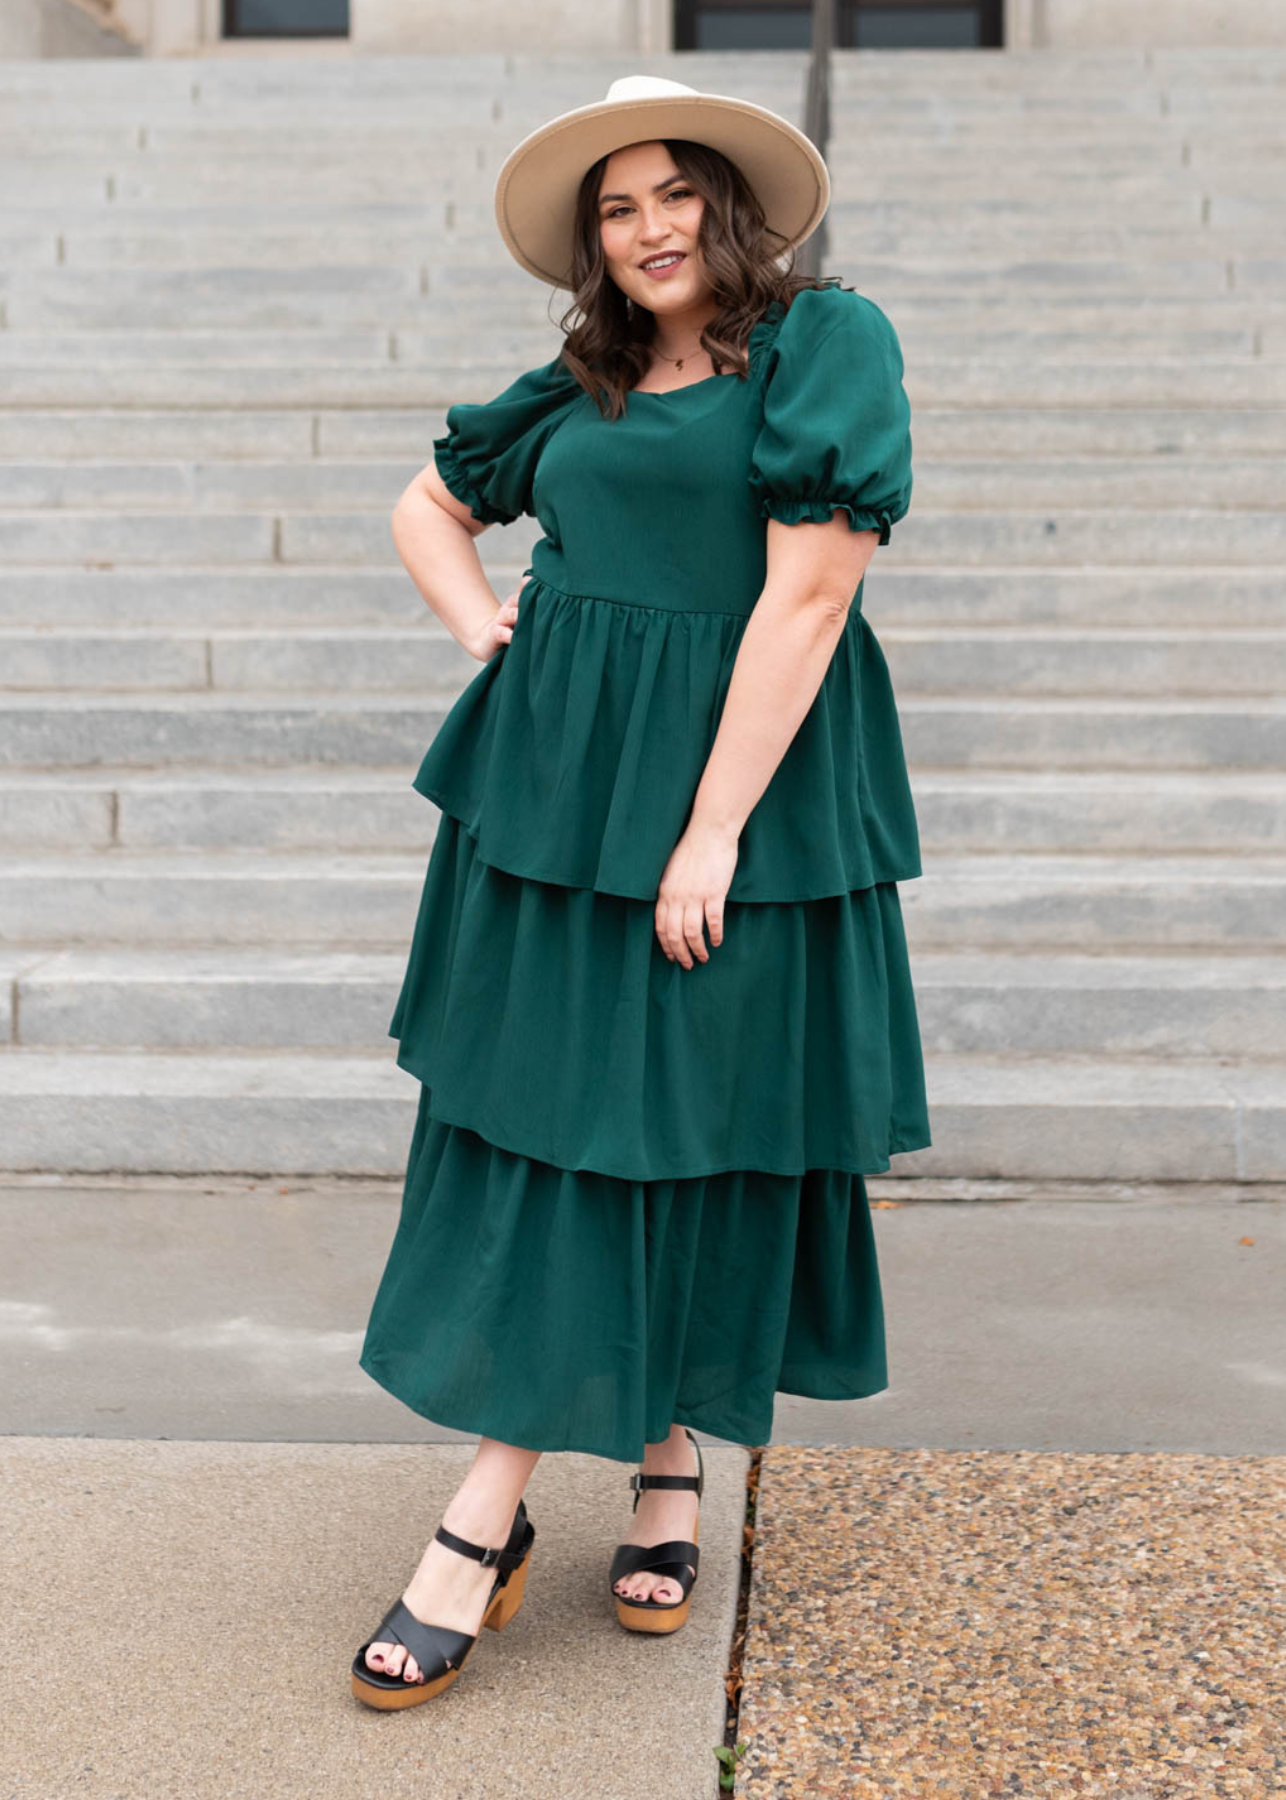 Green ruffle tiered dress with short sleeves